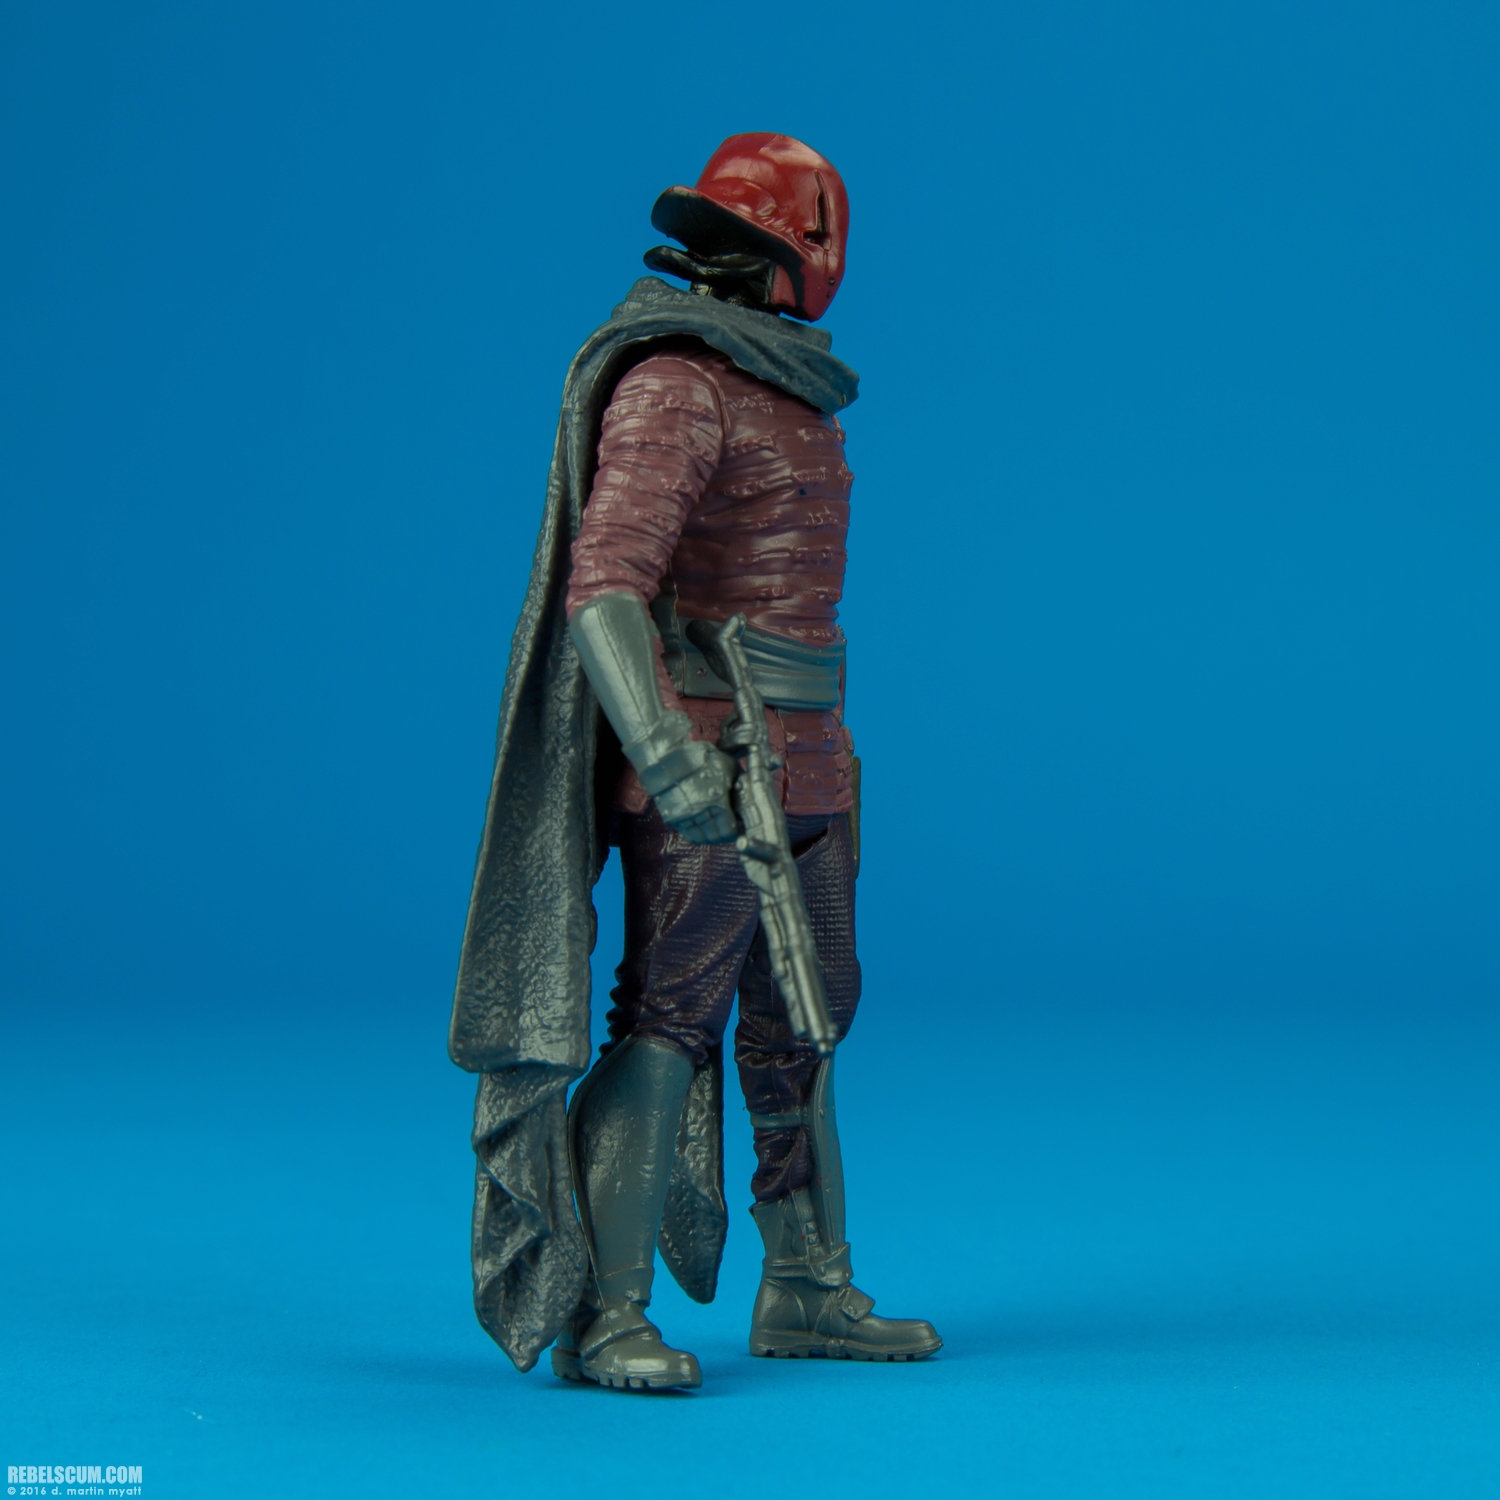 Sidon-Ithano-first-Mate-Quiggold-The-Force-Awakens-010.jpg